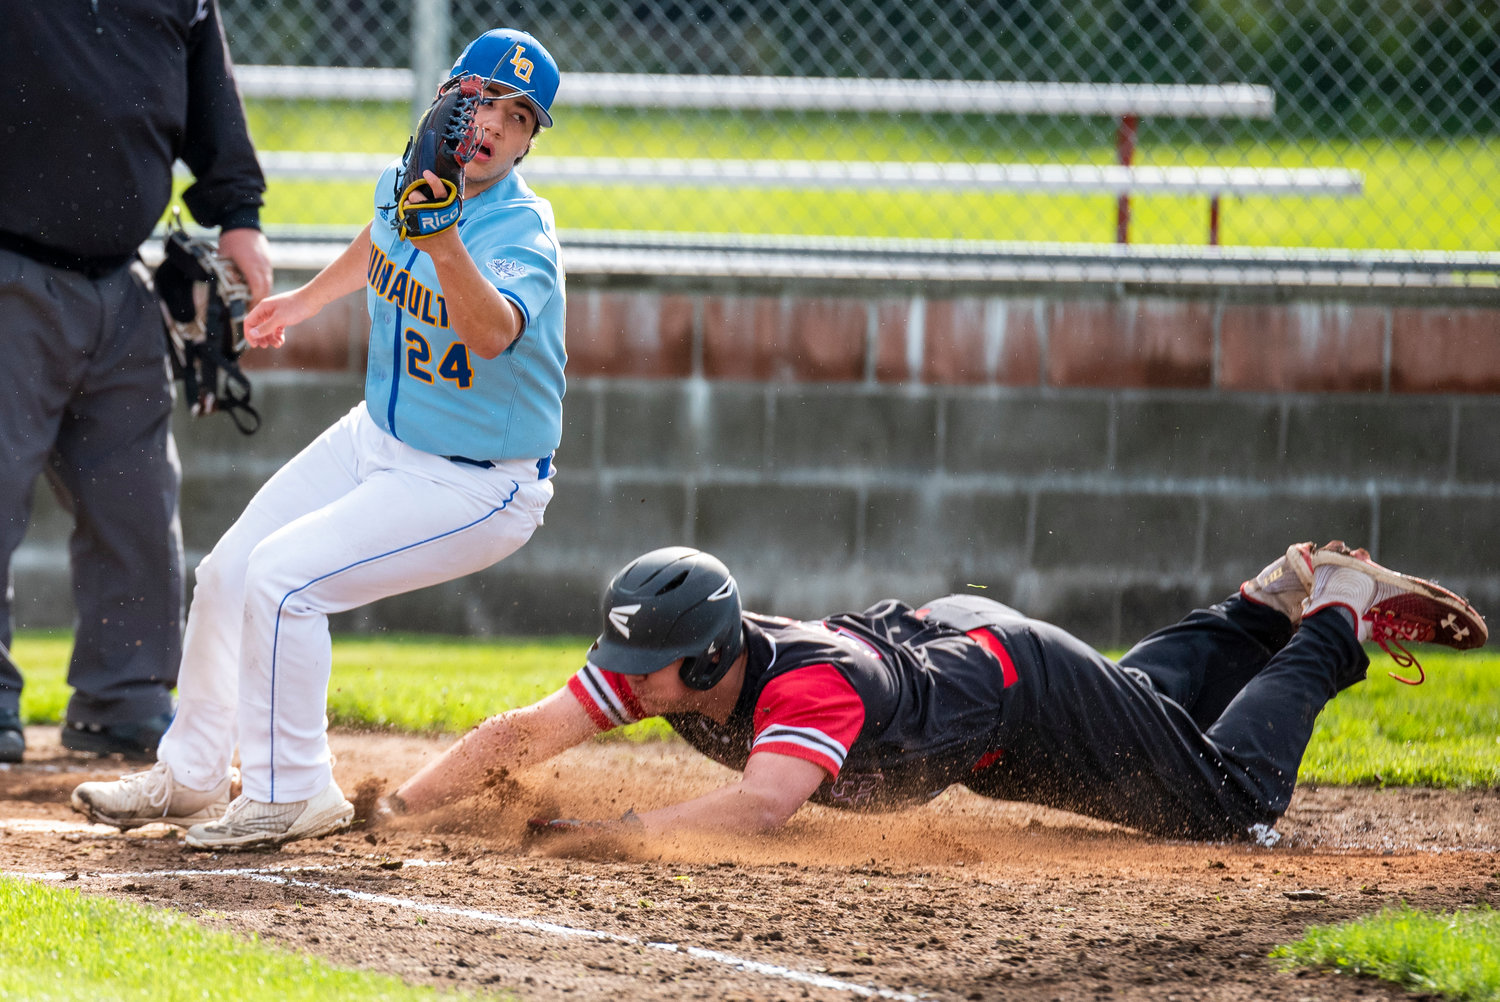 Mossyrock's Andrew Bender slides safely into home plate during a win over Lake Quinault on May 9.